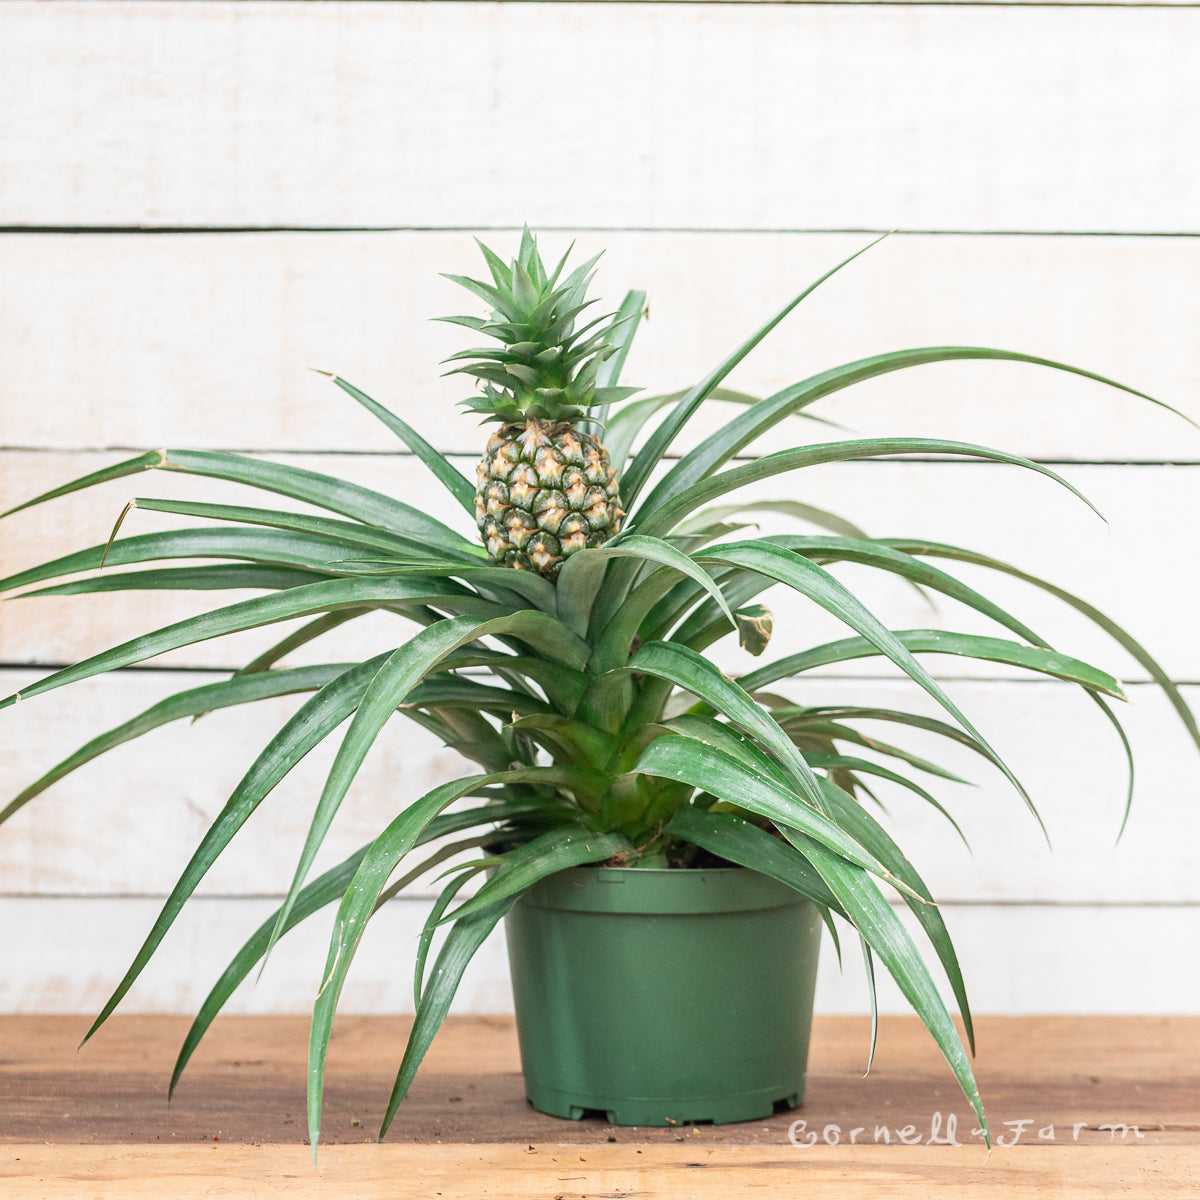 Ananas comosus 6in Pineapple Plant